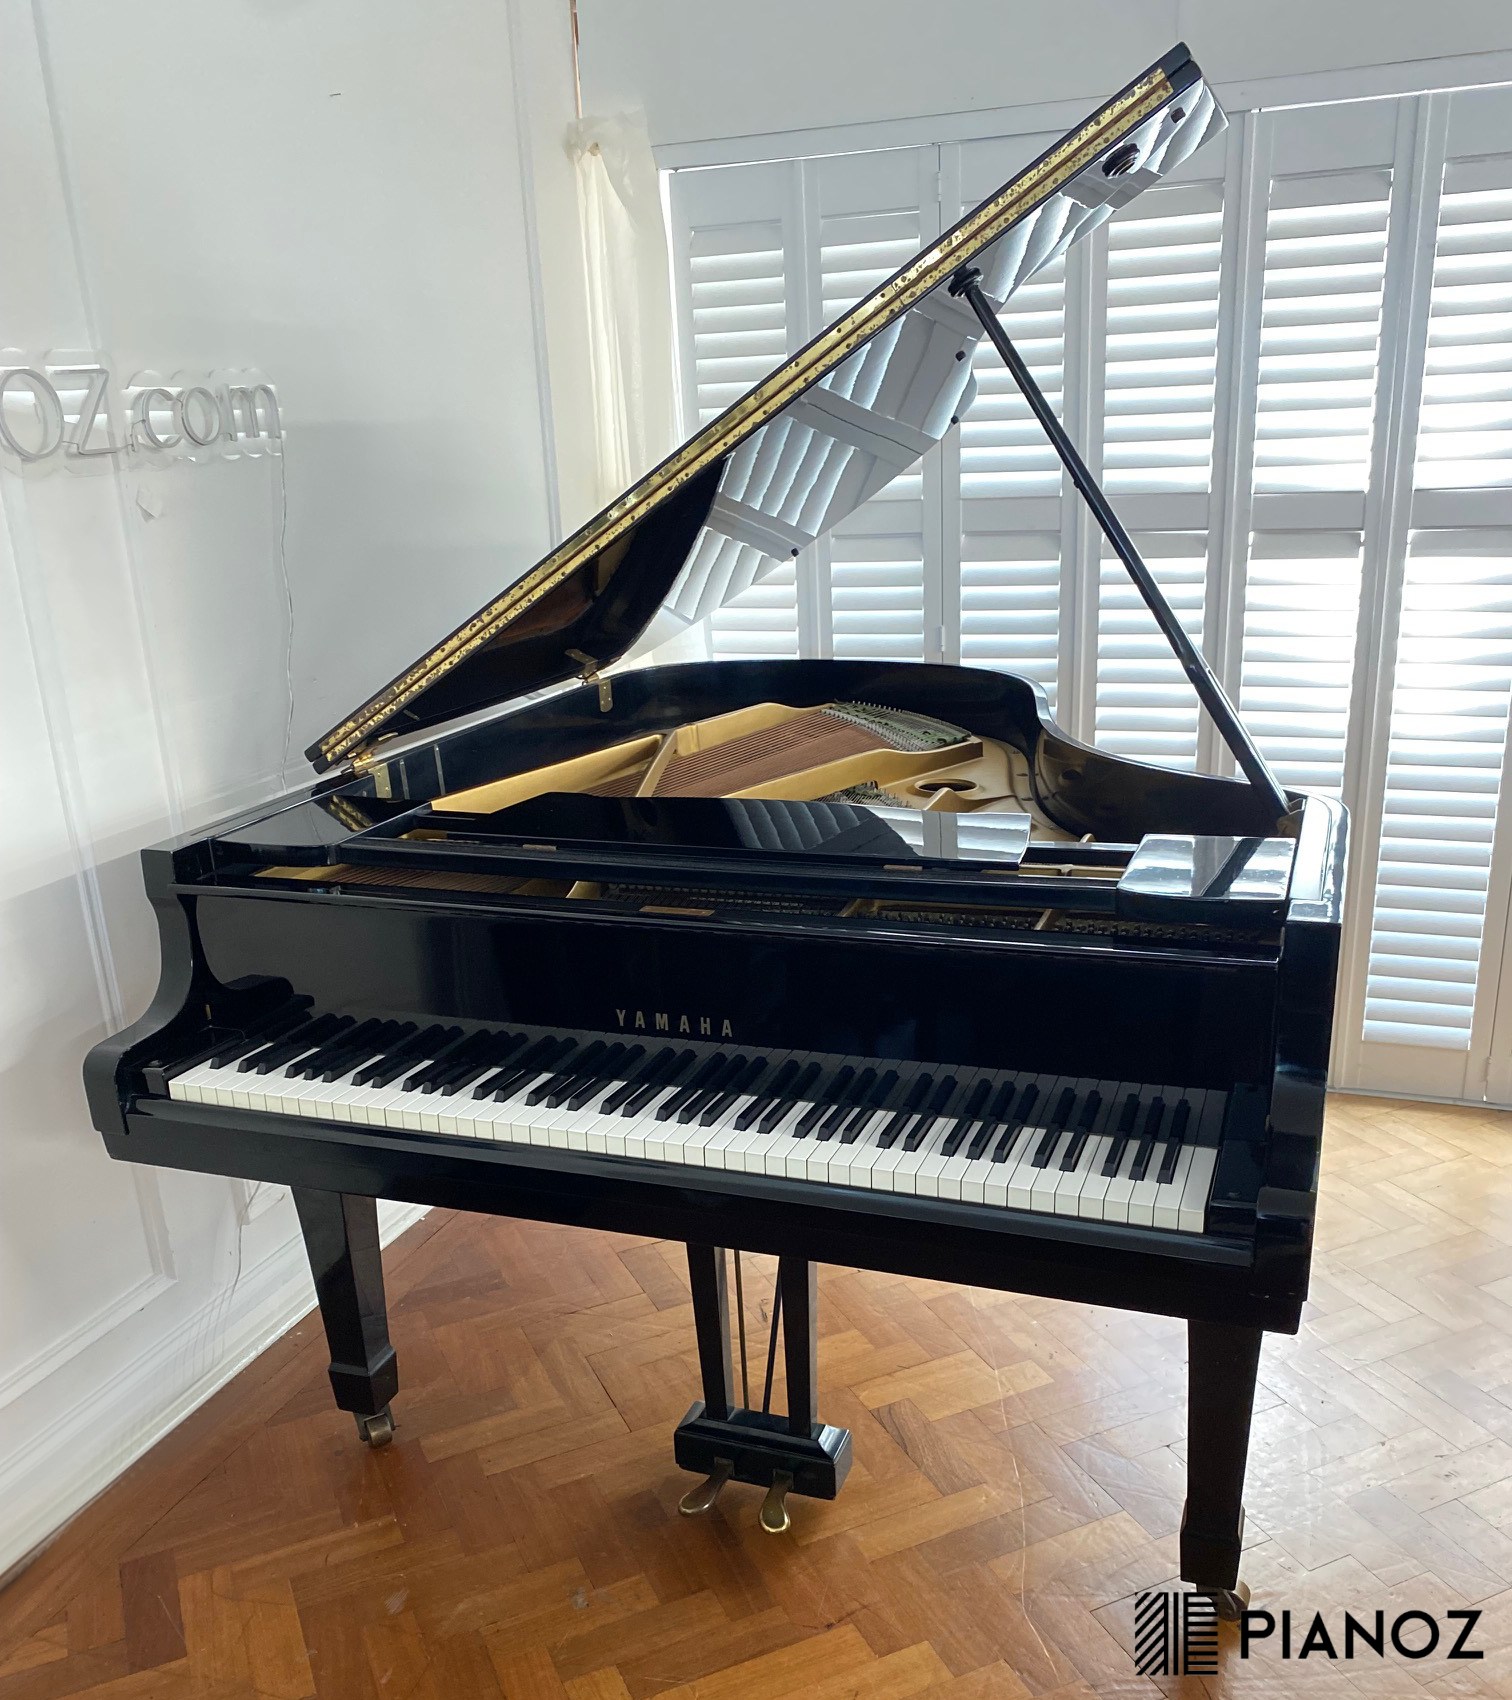 Yamaha G3 (C3) Japanese Grand Piano piano for sale in UK